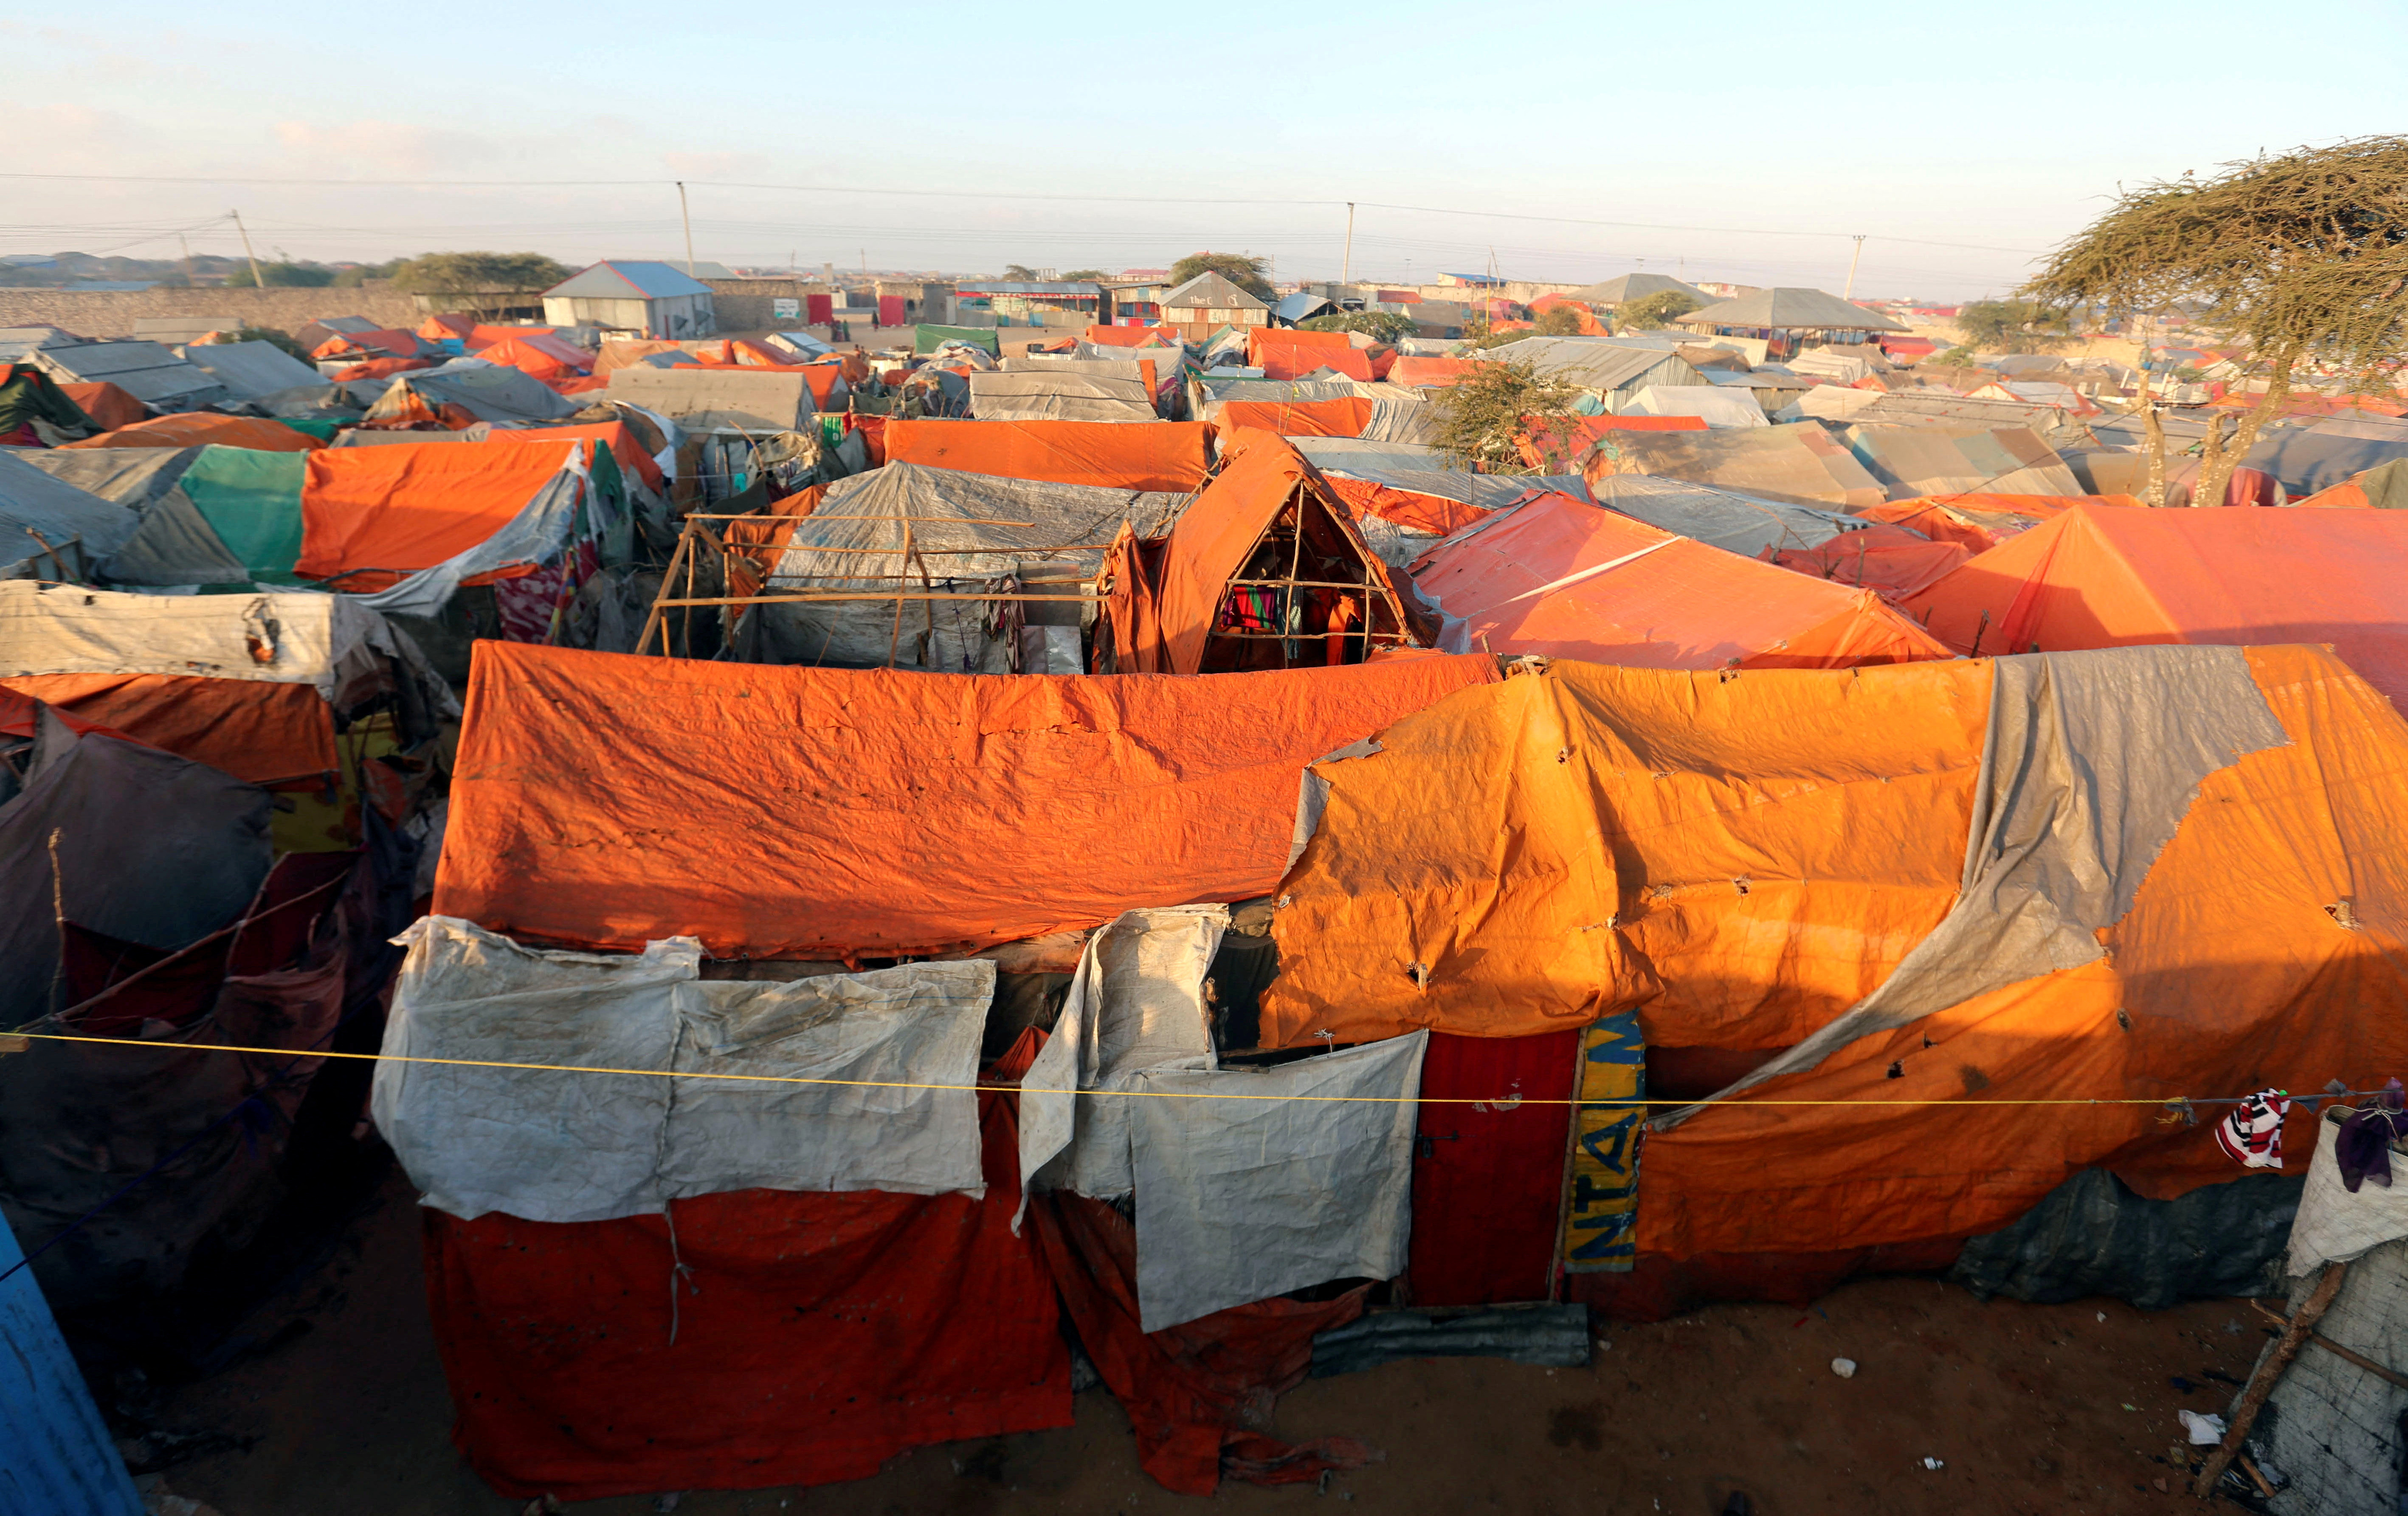 A general view shows a section of the Al-cadaala camp of the internally displaced people following the famine in Somalia's capital Mogadishu